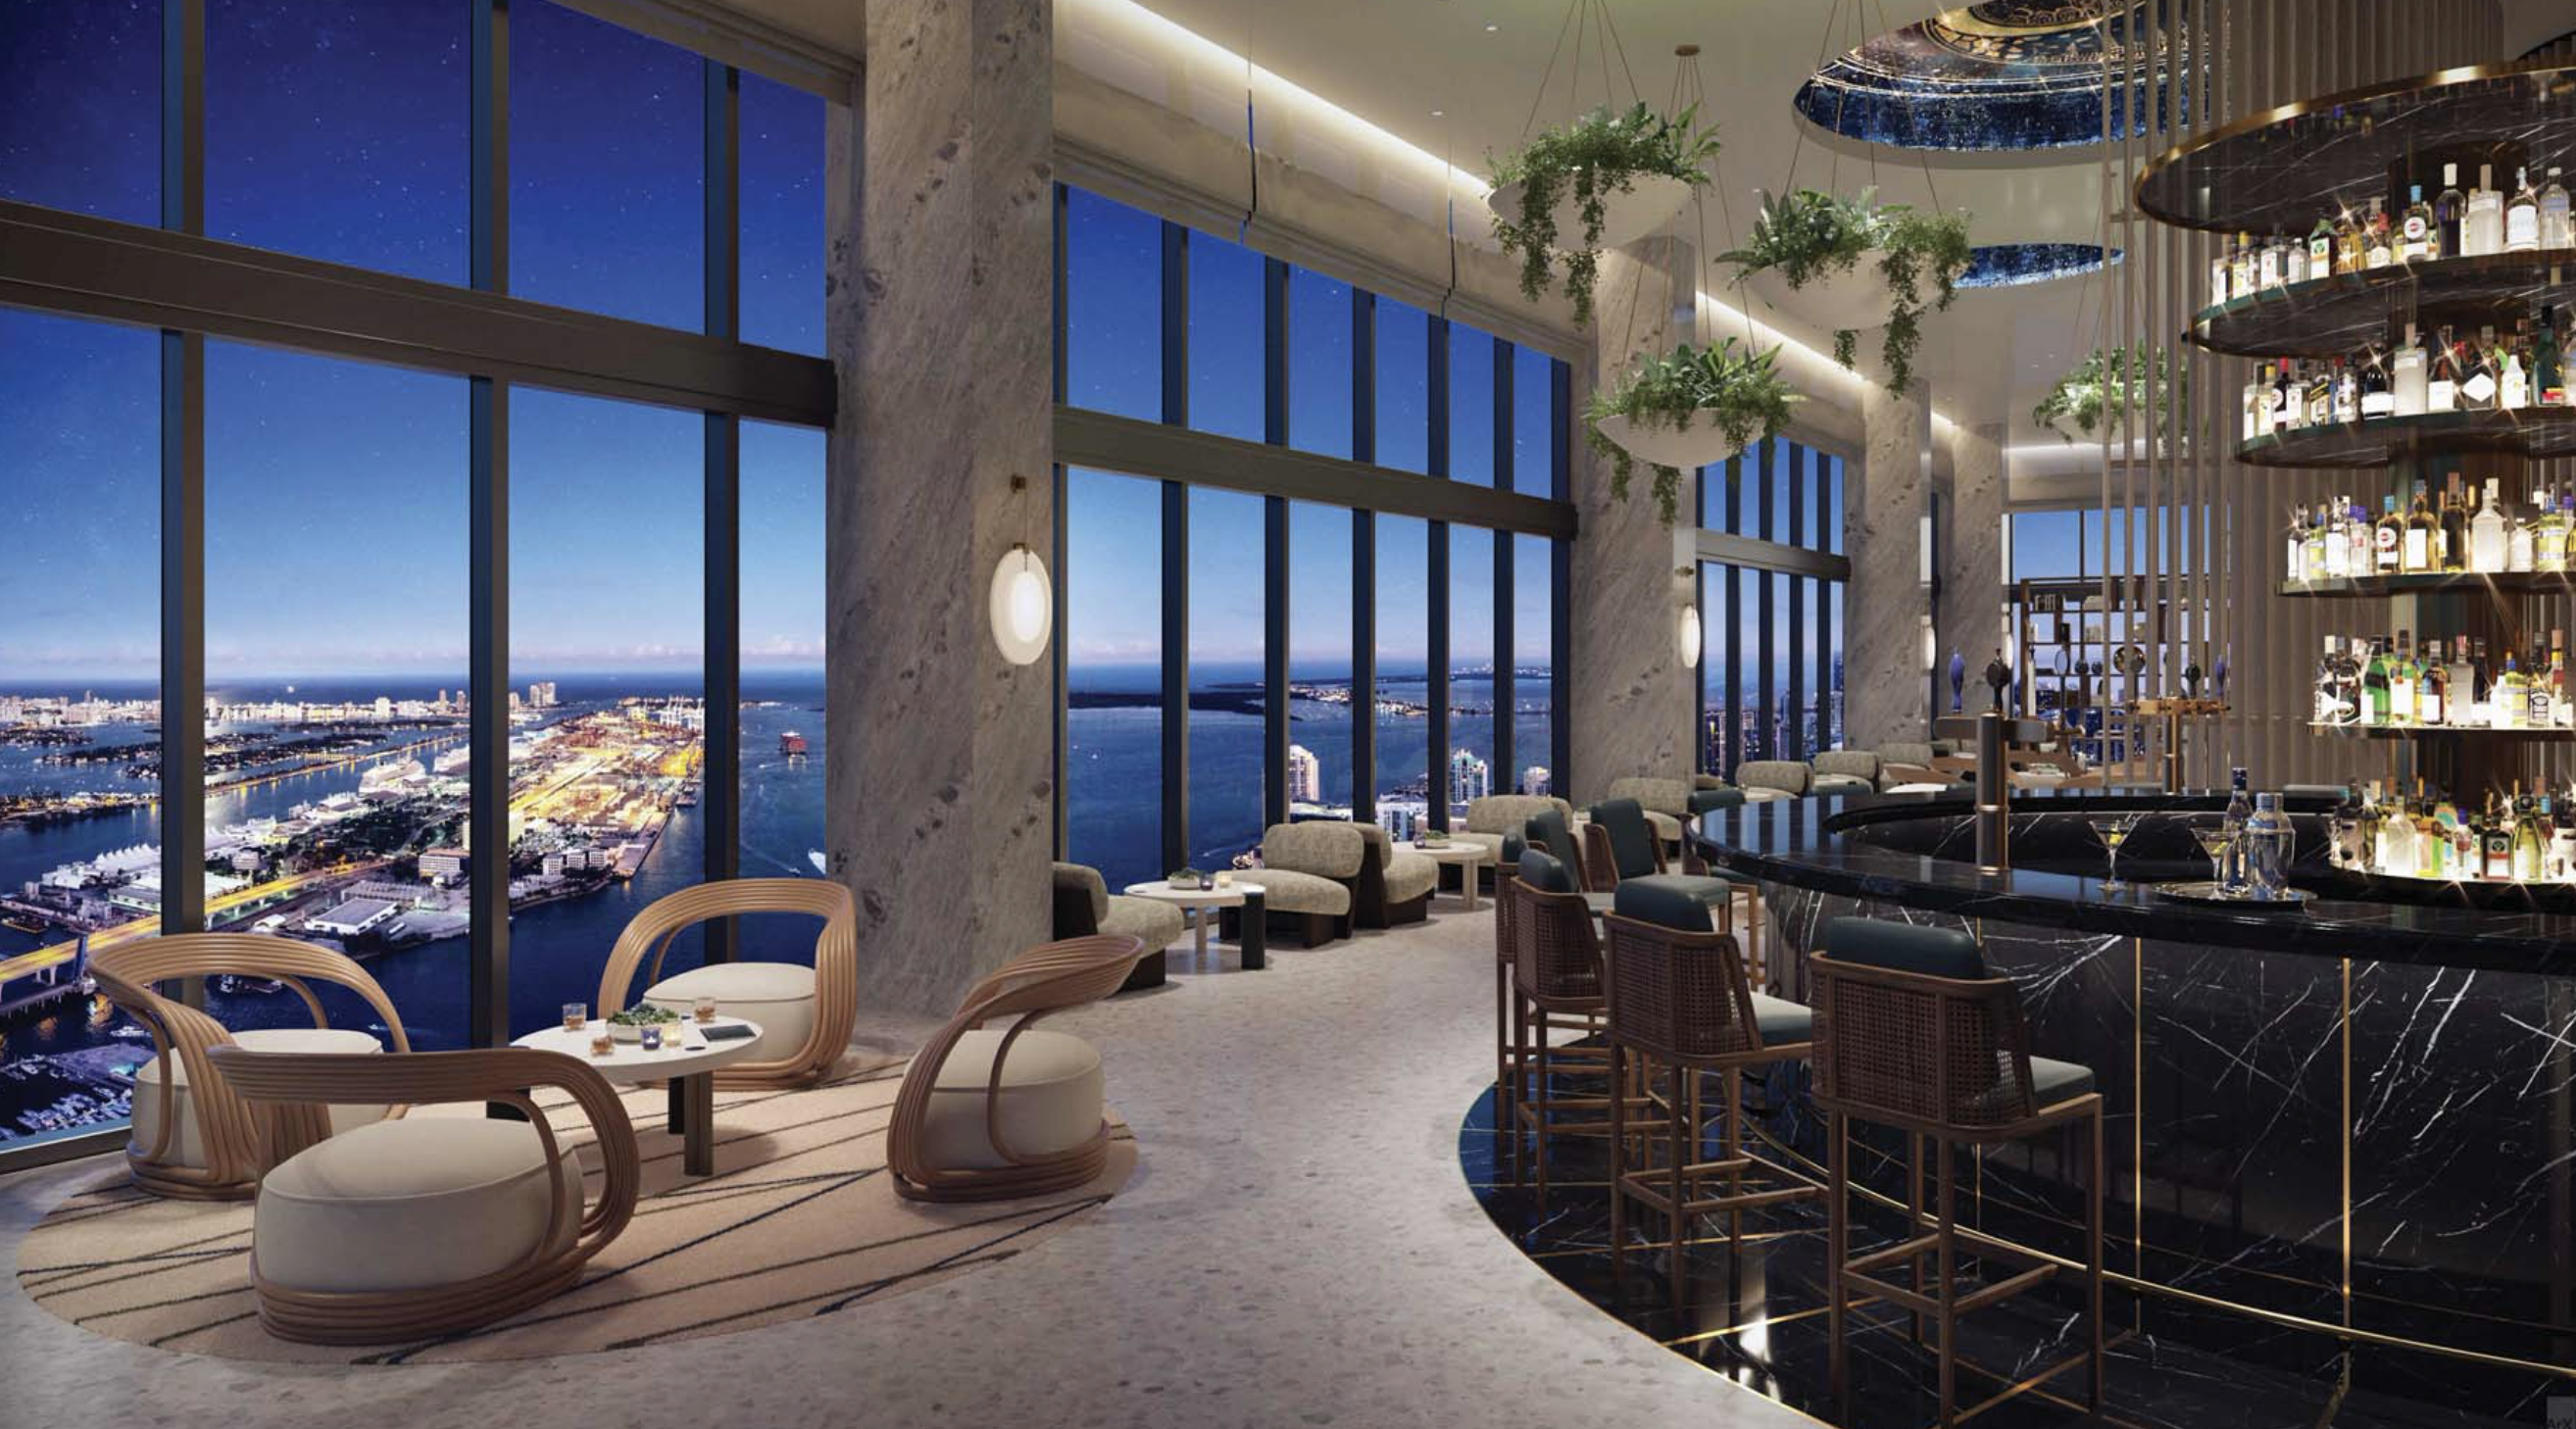 Hotel Lounge Bar. Rendering courtesy of ArX Solutions USA LLC.